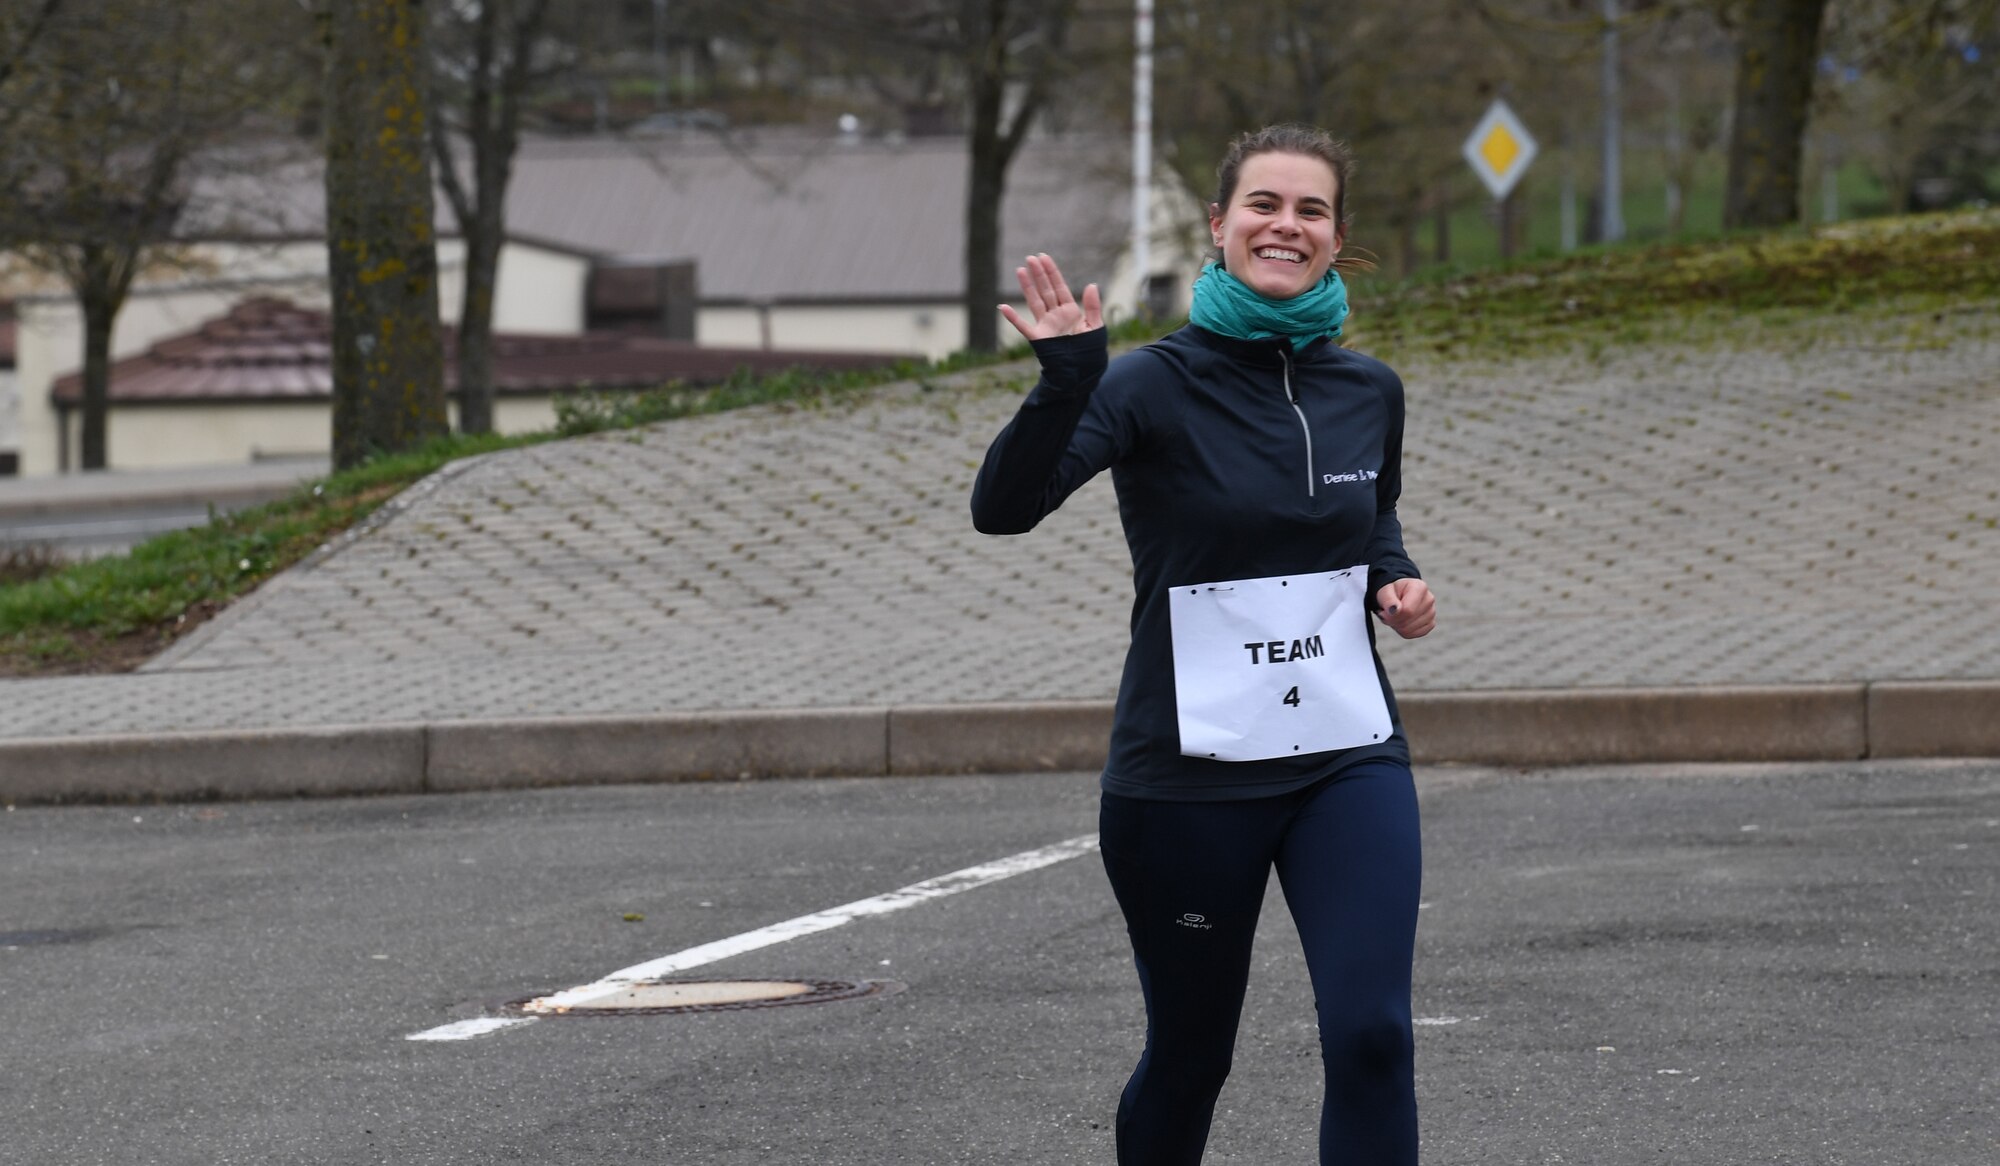 Denise Wilson, 52nd Force Support Squadron Human Resource specialist, waves at the camera during the "Run with Rosie" race event at Spangdahlem Air Base, Germany, March 12, 2020. Wilson and her teammate came in first place in the competition. (U.S. Air Force photo by Airman 1st Class Alison Stewart)